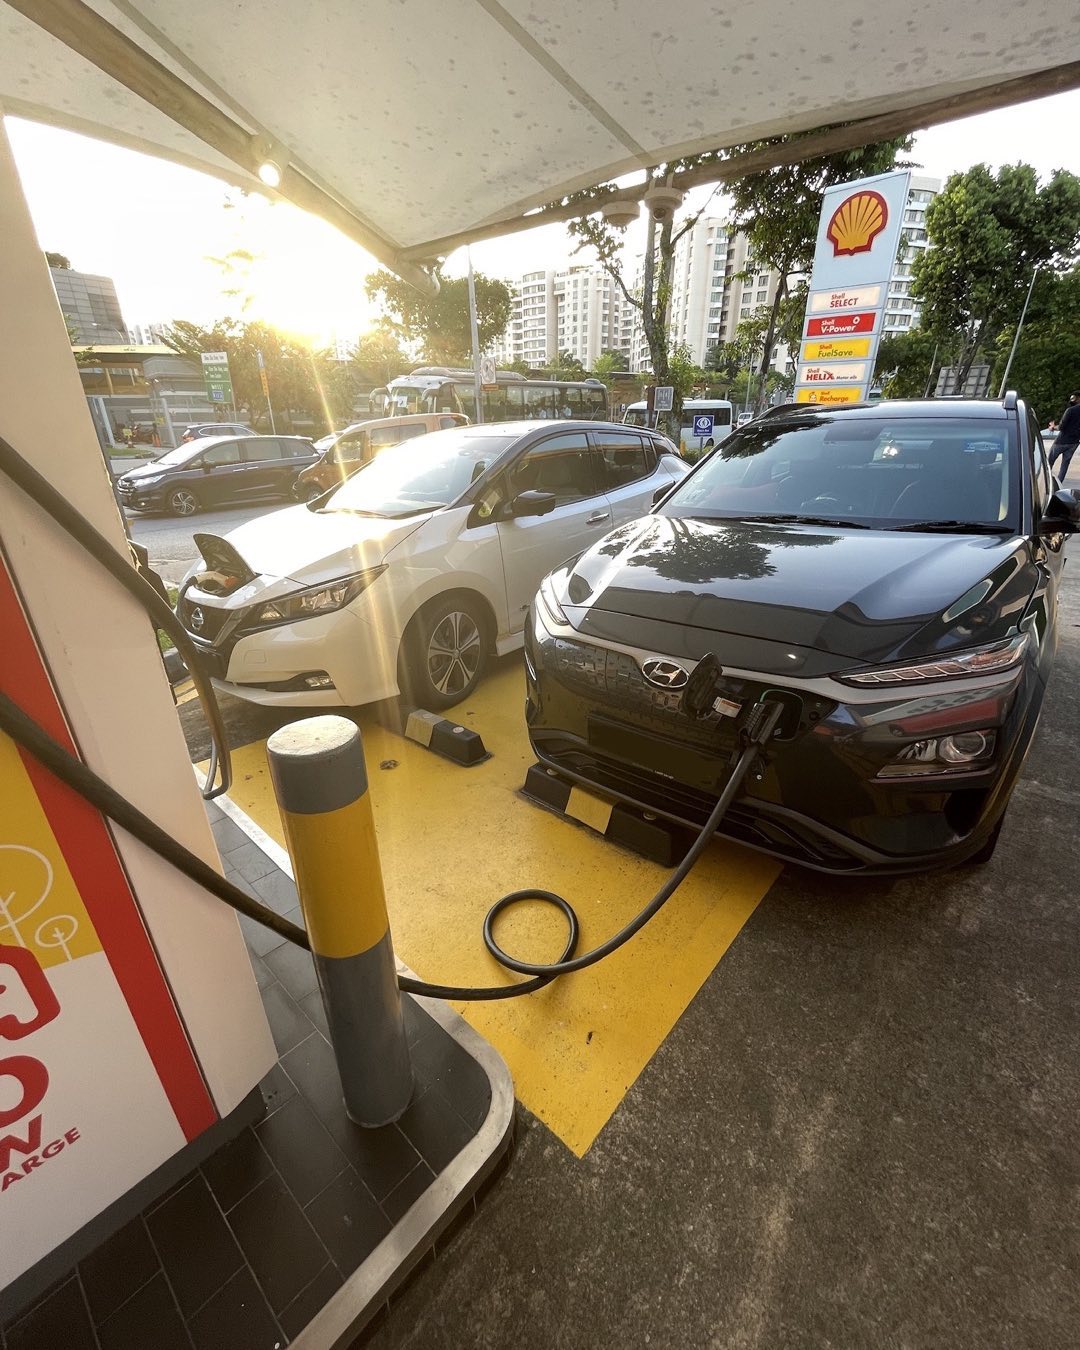 shell electrive vehicle charging station